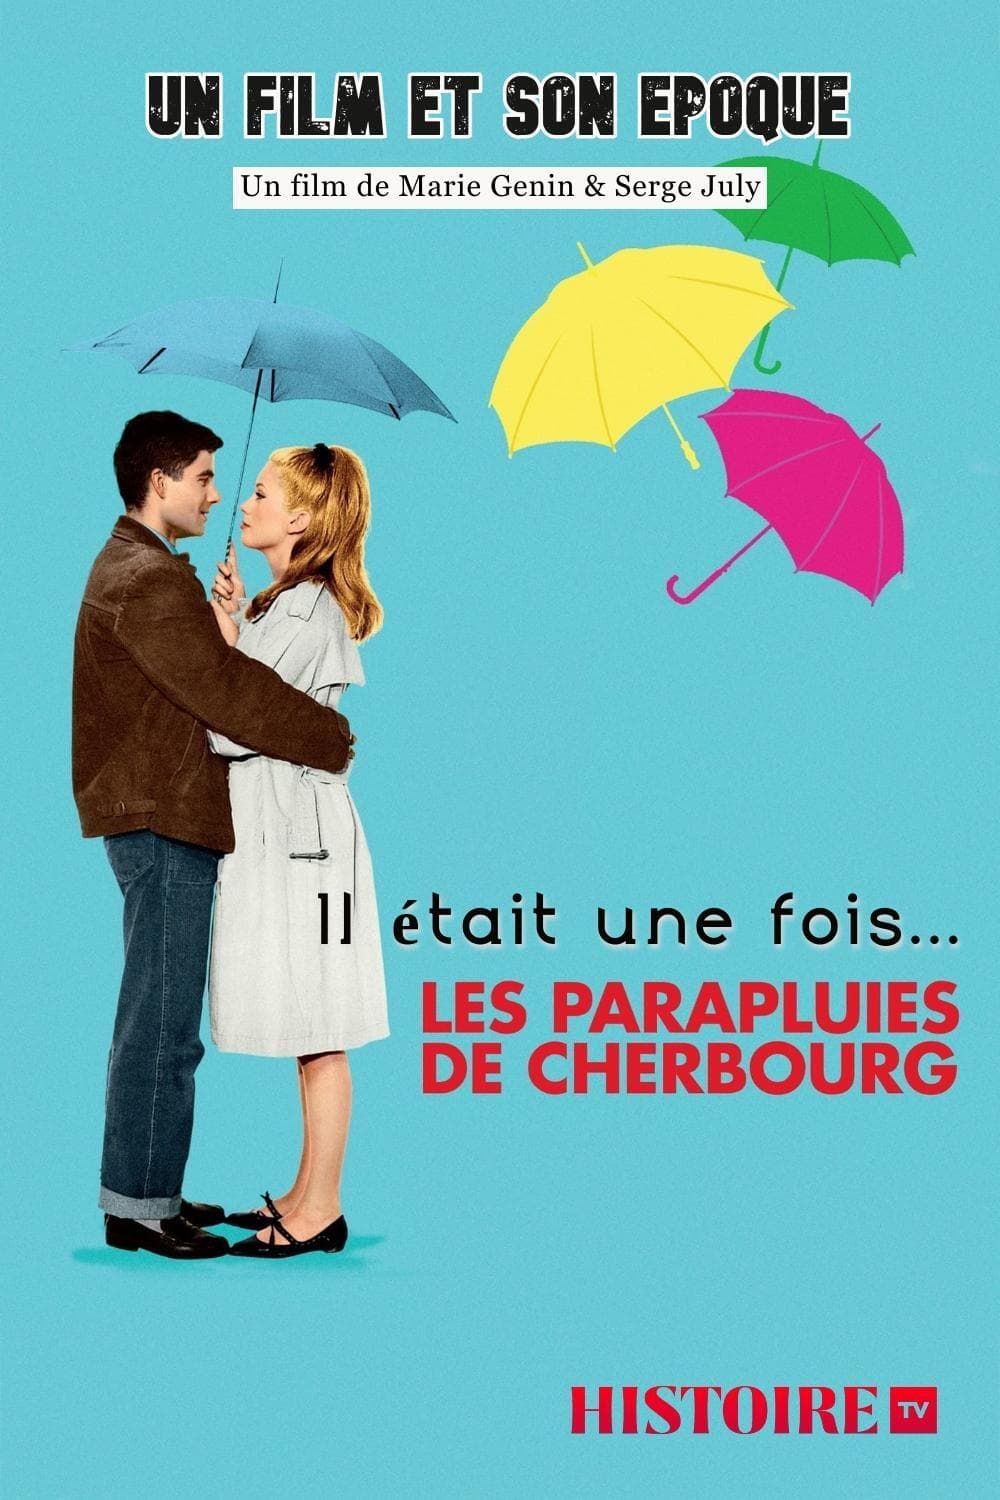 Once Upon a Time...: The Umbrellas of Cherbourg (2008)